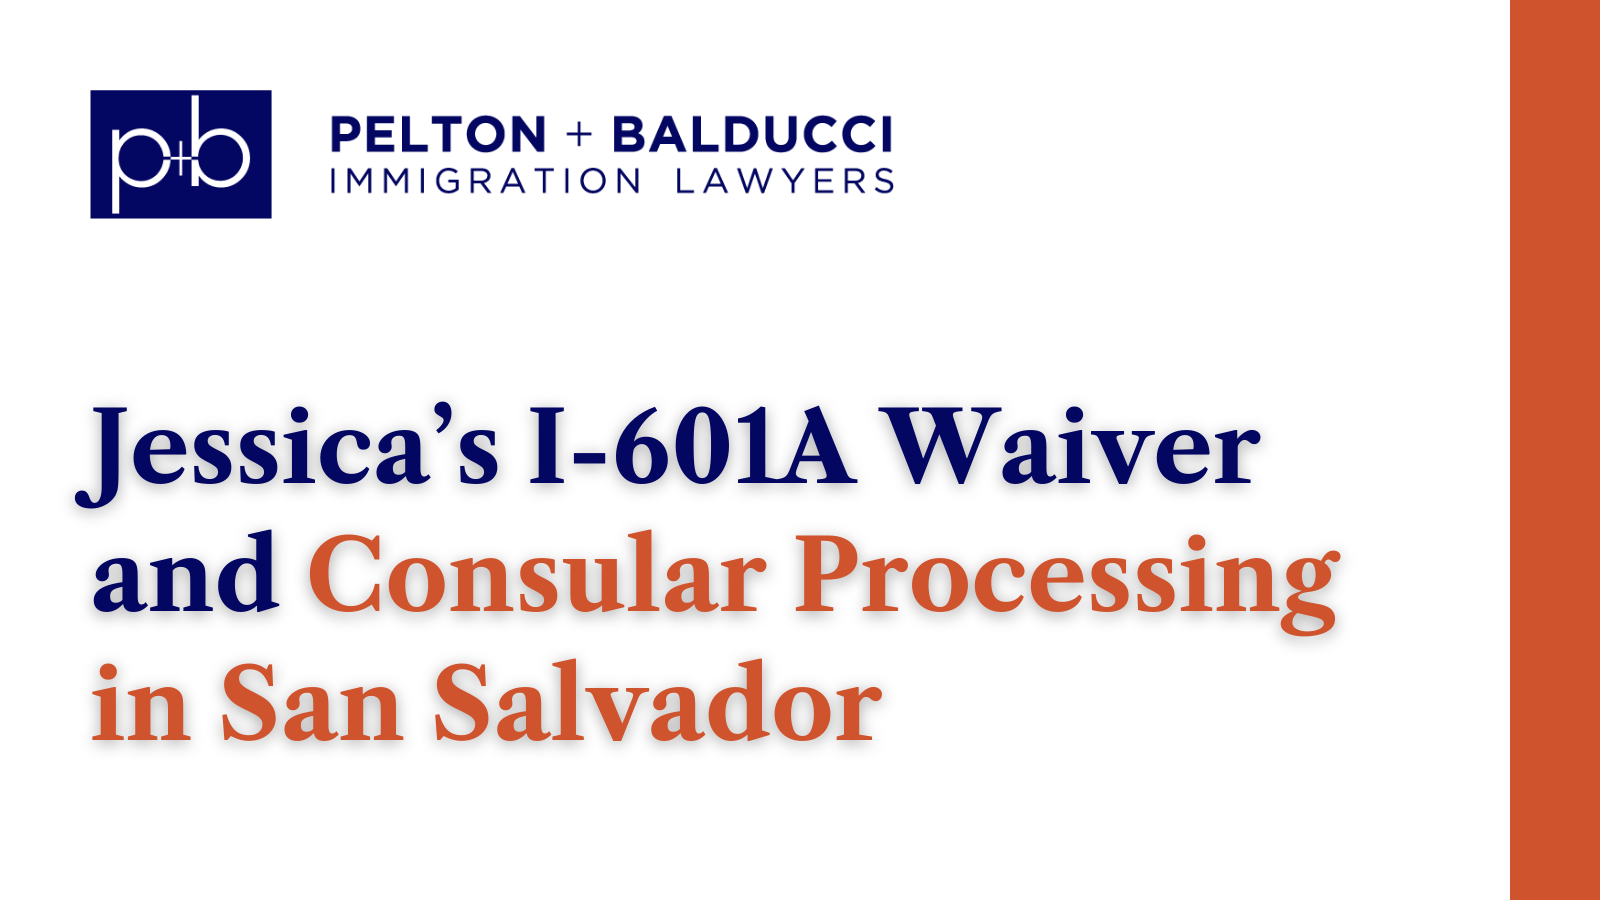 Jessica’s I-601A Waiver and Consular Processing in San Salvador - New Orleans Immigration Lawyers - Pelton Balducci